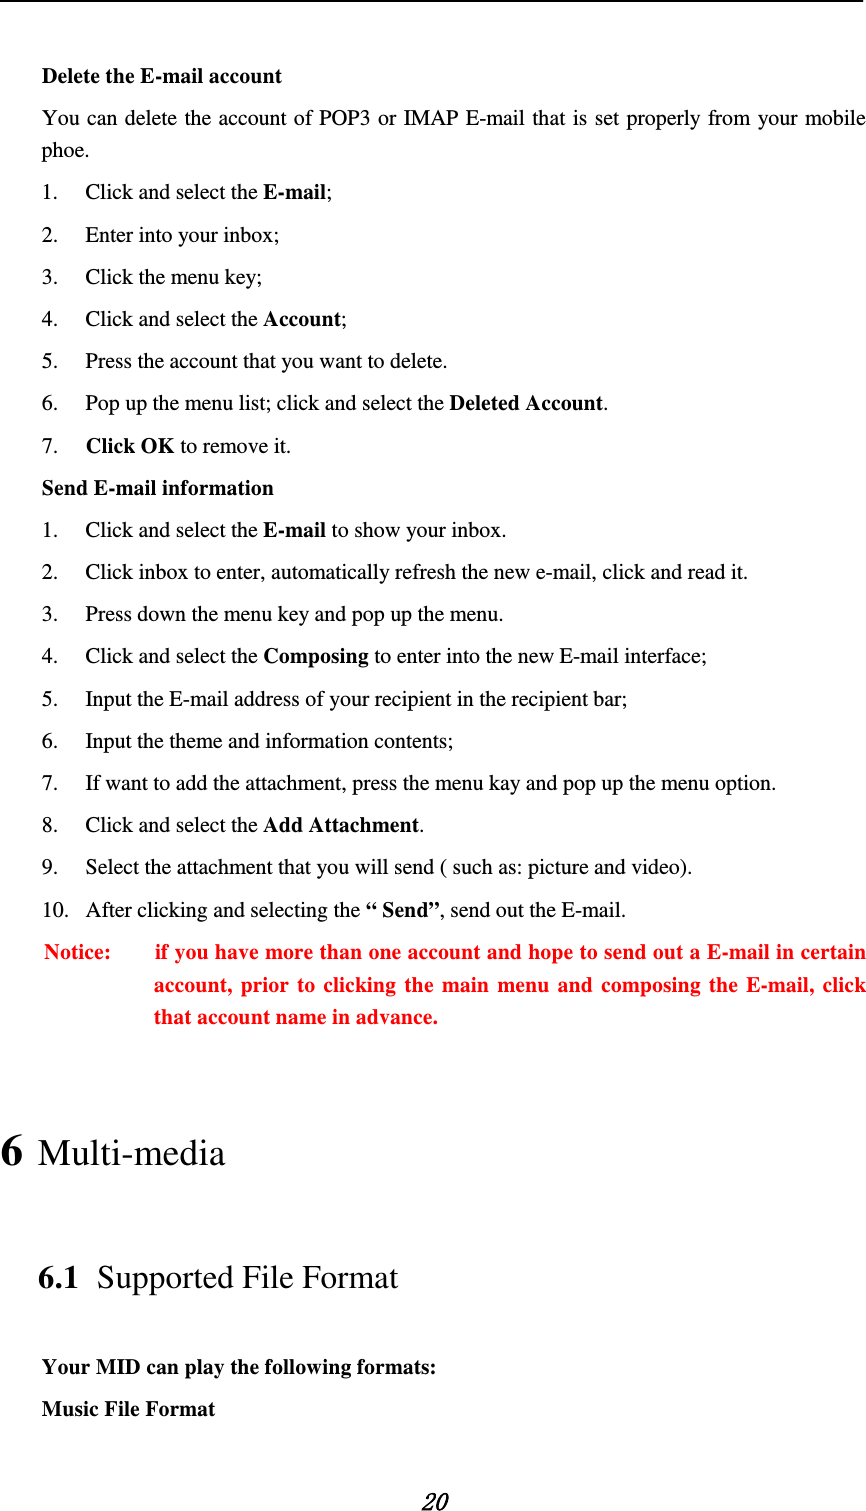    20  Delete the E-mail account You can delete the account of POP3 or IMAP E-mail that is set properly from your mobile phoe.   1. Click and select the E-mail;   2. Enter into your inbox;   3. Click the menu key;   4. Click and select the Account;   5. Press the account that you want to delete.   6. Pop up the menu list; click and select the Deleted Account.   7. Click OK to remove it. Send E-mail information   1. Click and select the E-mail to show your inbox.   2. Click inbox to enter, automatically refresh the new e-mail, click and read it.     3. Press down the menu key and pop up the menu.   4. Click and select the Composing to enter into the new E-mail interface;   5. Input the E-mail address of your recipient in the recipient bar;   6. Input the theme and information contents;   7. If want to add the attachment, press the menu kay and pop up the menu option.   8. Click and select the Add Attachment.   9. Select the attachment that you will send ( such as: picture and video). 10. After clicking and selecting the “ Send”, send out the E-mail.   Notice:        if you have more than one account and hope to send out a E-mail in certain account, prior to clicking the main menu and composing the E-mail, click that account name in advance. 6 Multi-media 6.1 Supported File Format Your MID can play the following formats:   Music File Format   